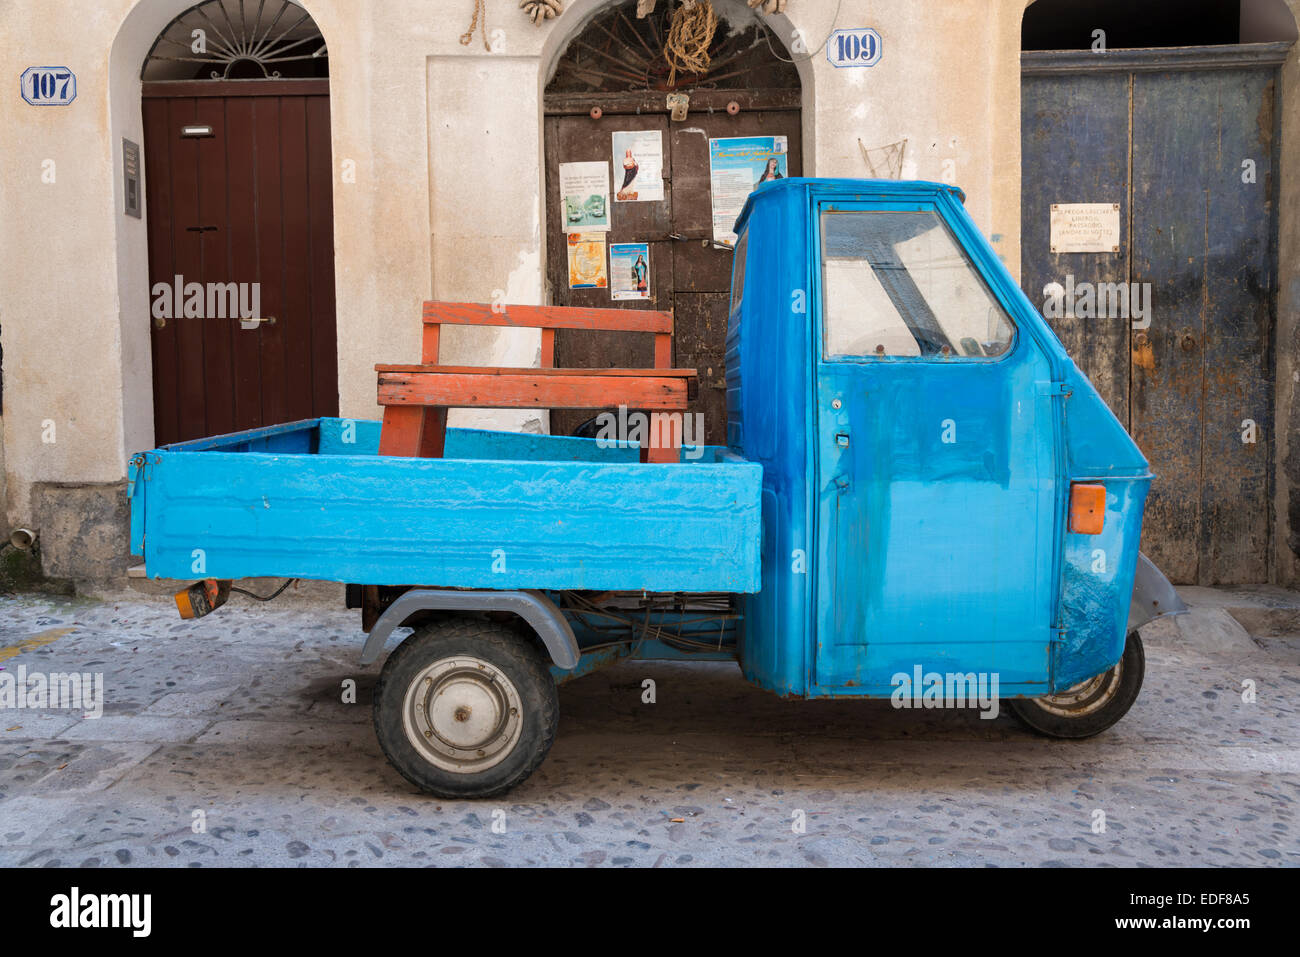 An old Piaggio APE vehicle, truck or scooter in a street in Cefalu Sicily Italy Stock Photo